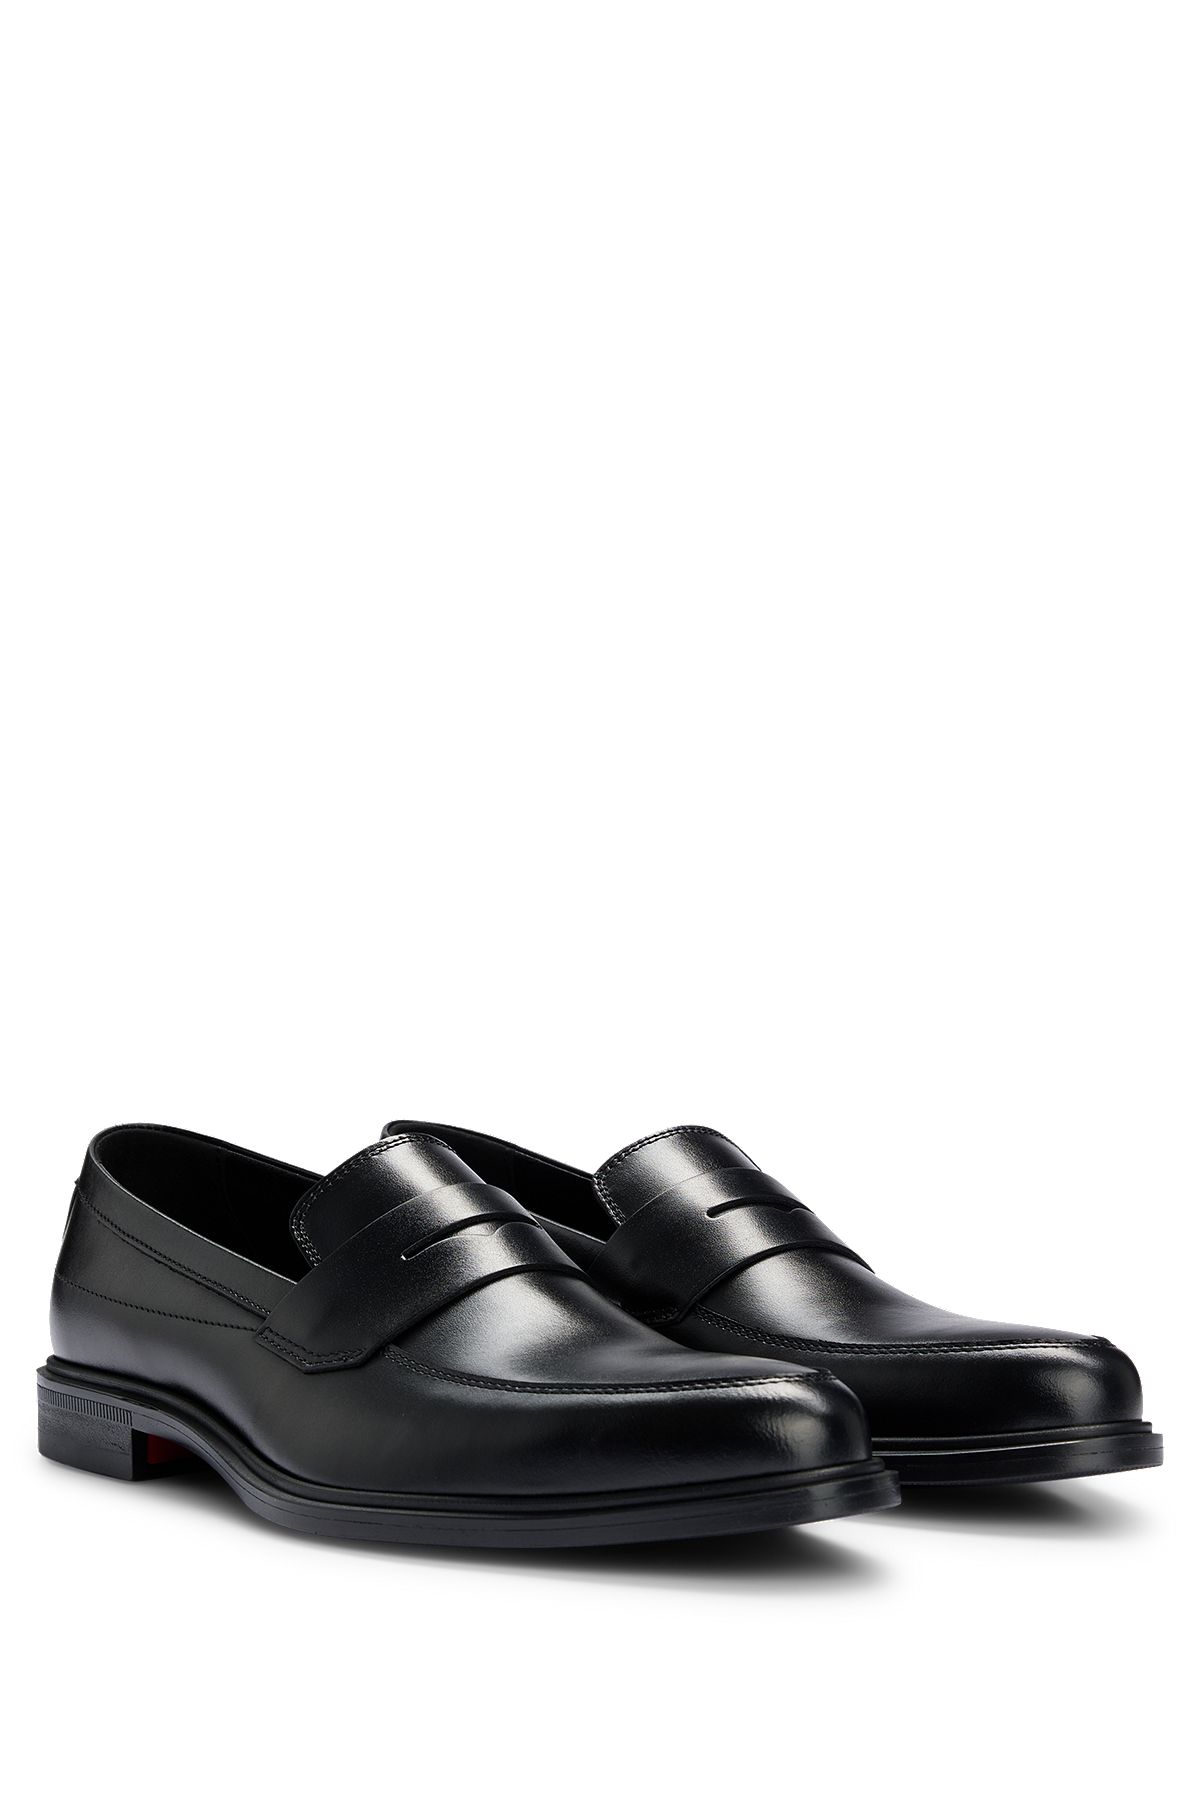 Leather loafers with penny trim and rubber sole, Black